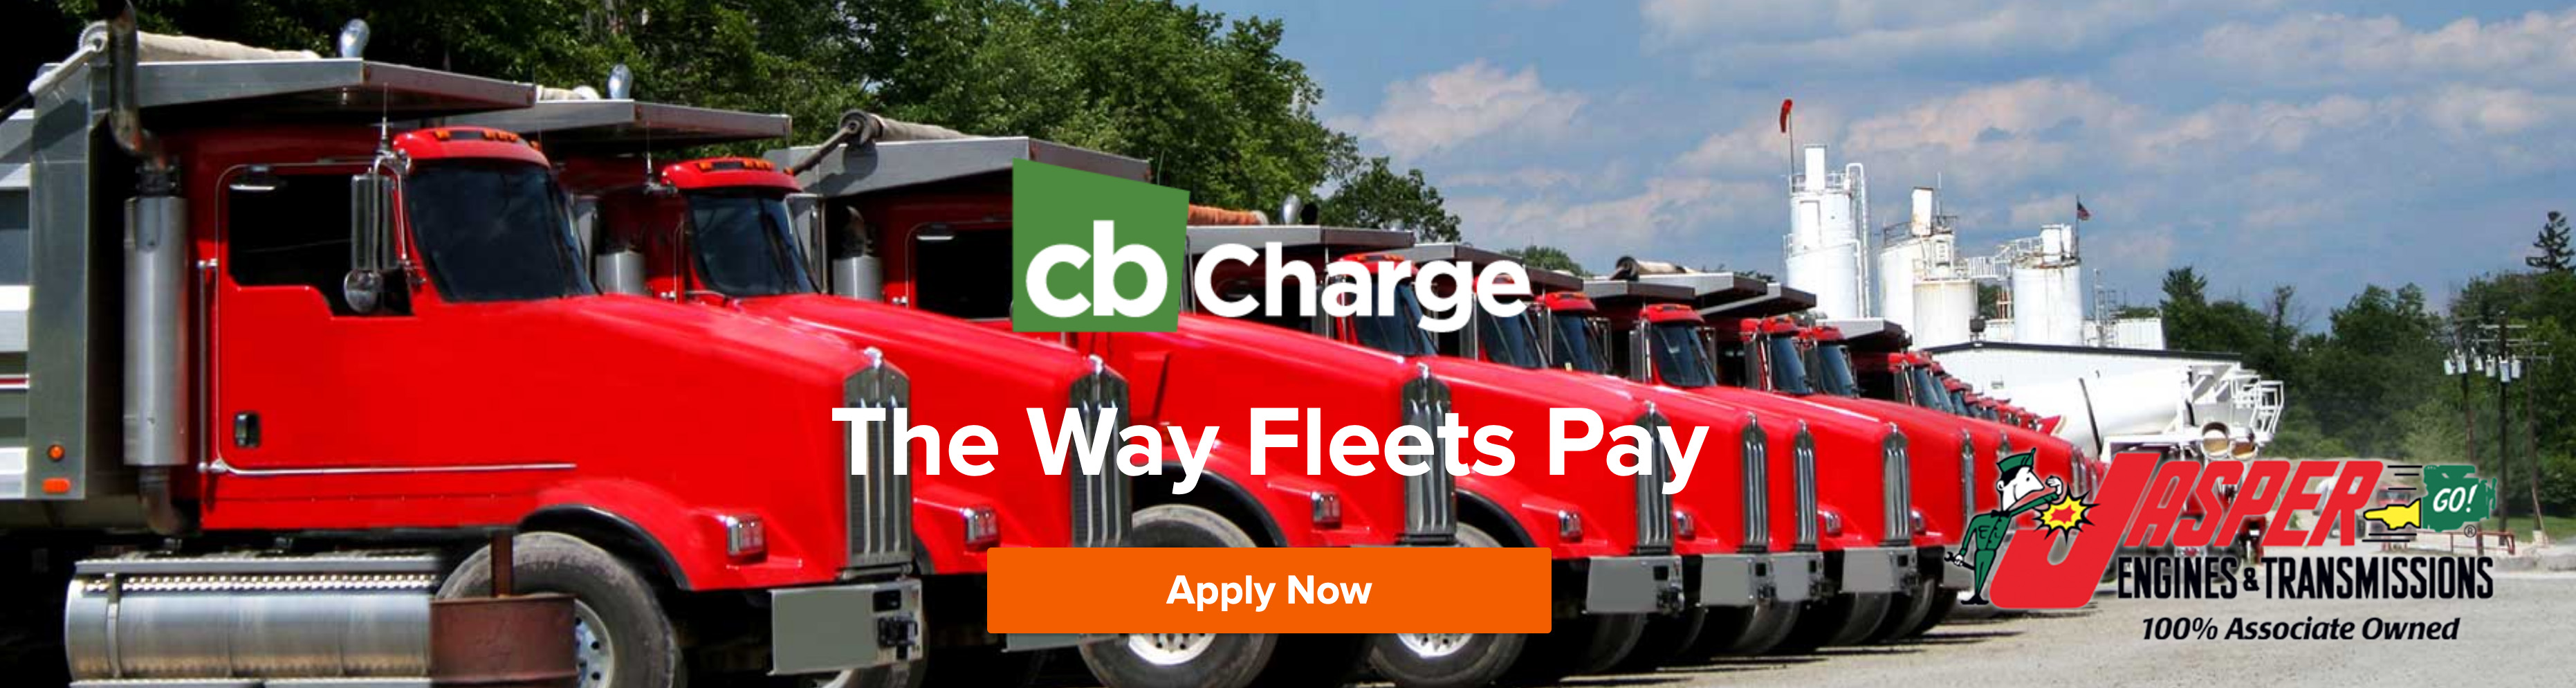 cbCharge fleet financing banner click here to apply